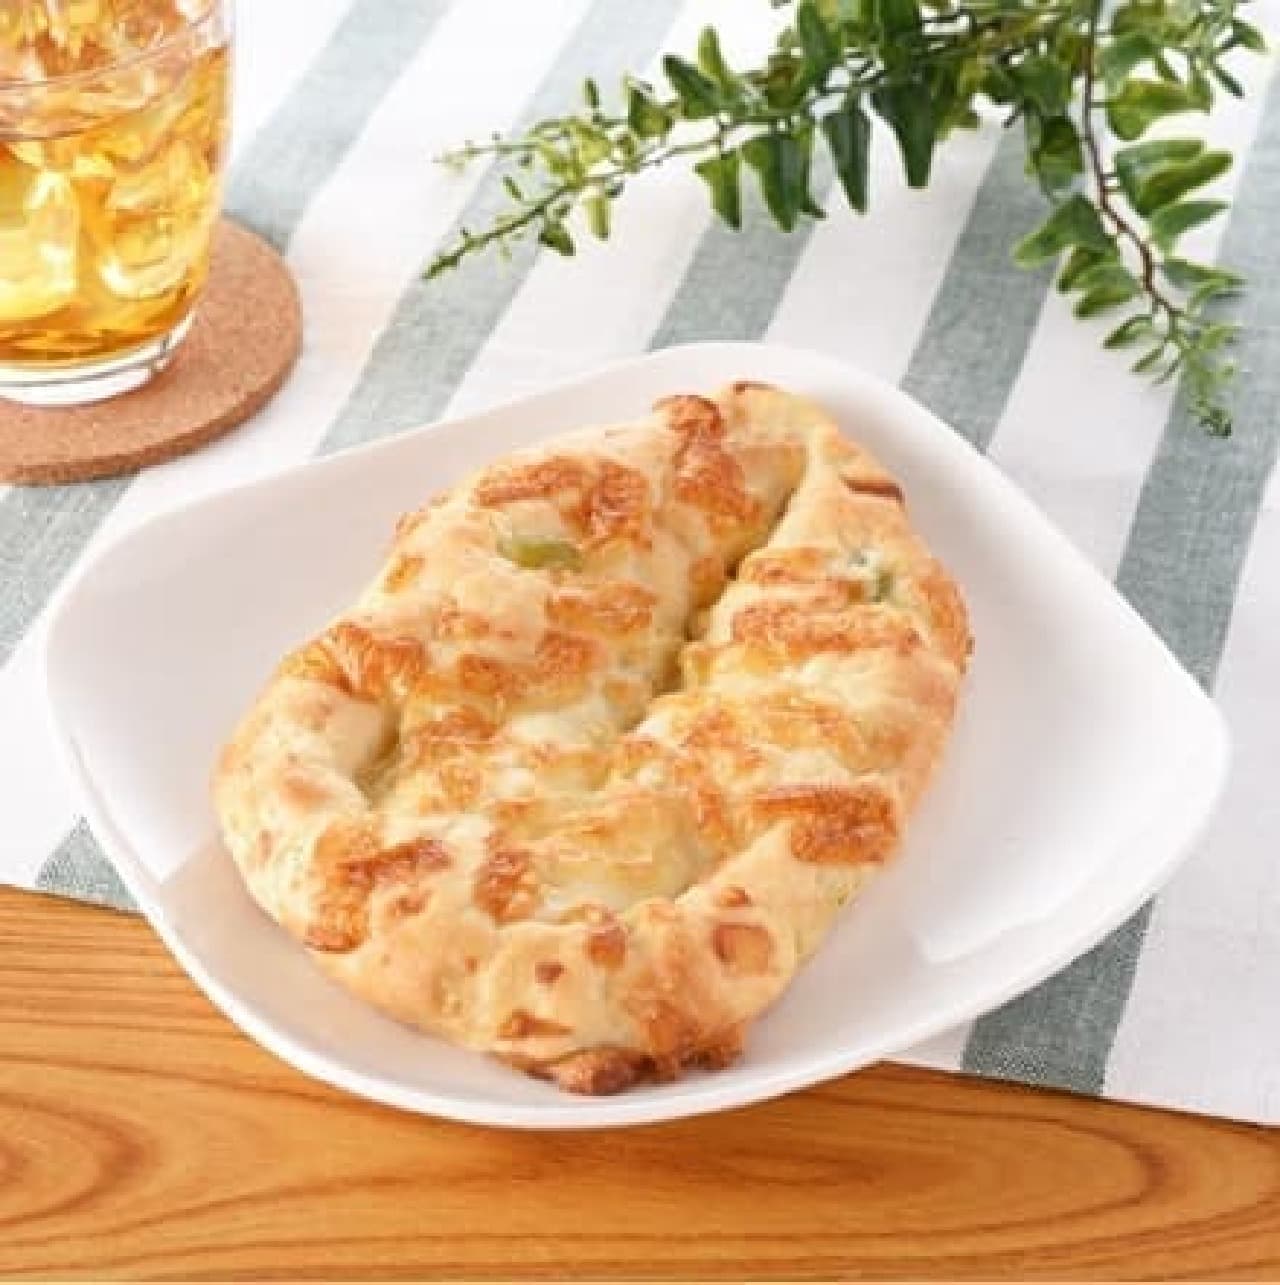 FamilyMart "Green soybeans and cheese fougasse"